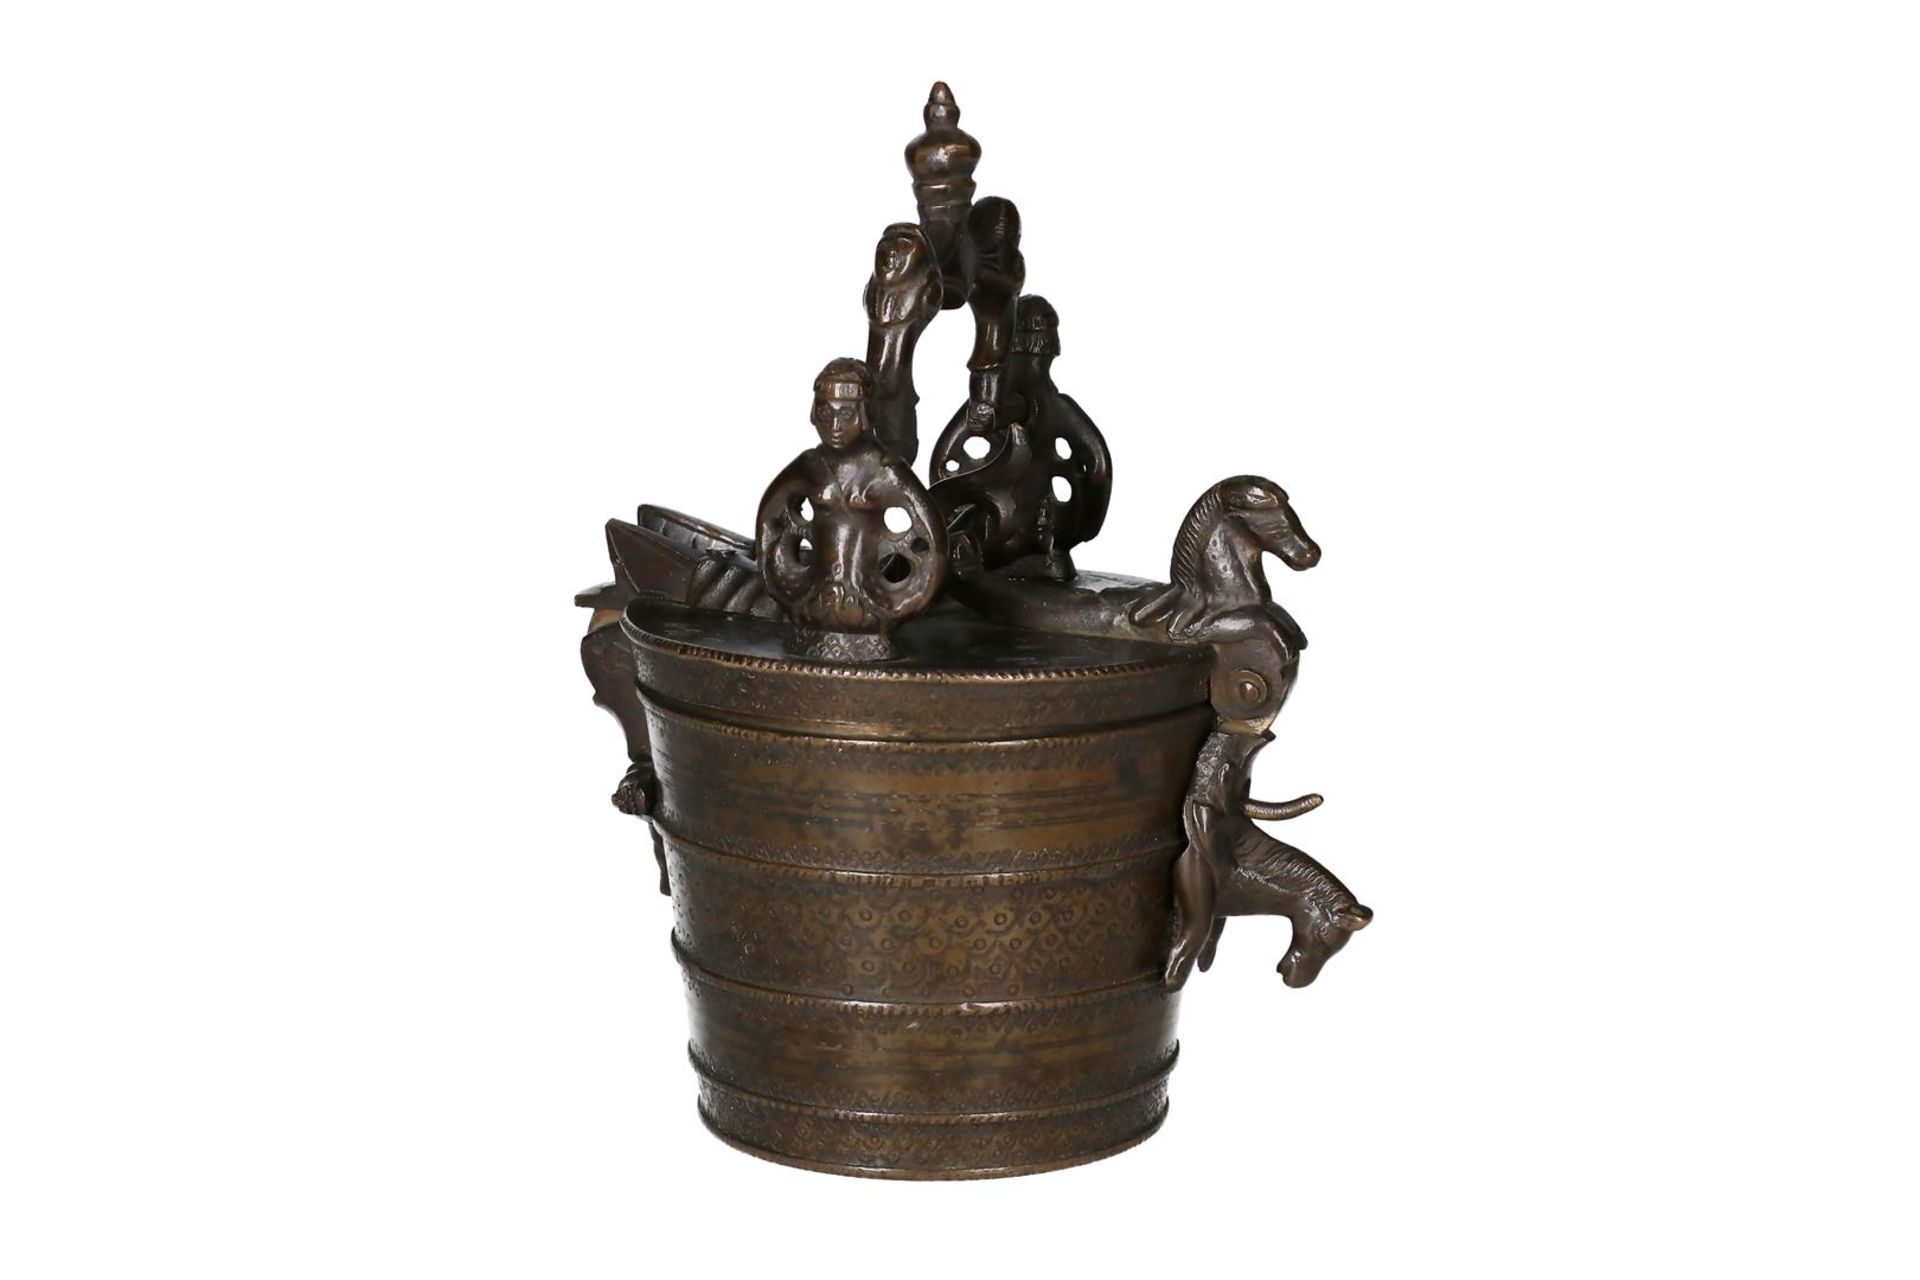 A Nuremberg nested cup-weight, 16 pound for Austria, 17th century. Master sign 'bell CS' = Christoph